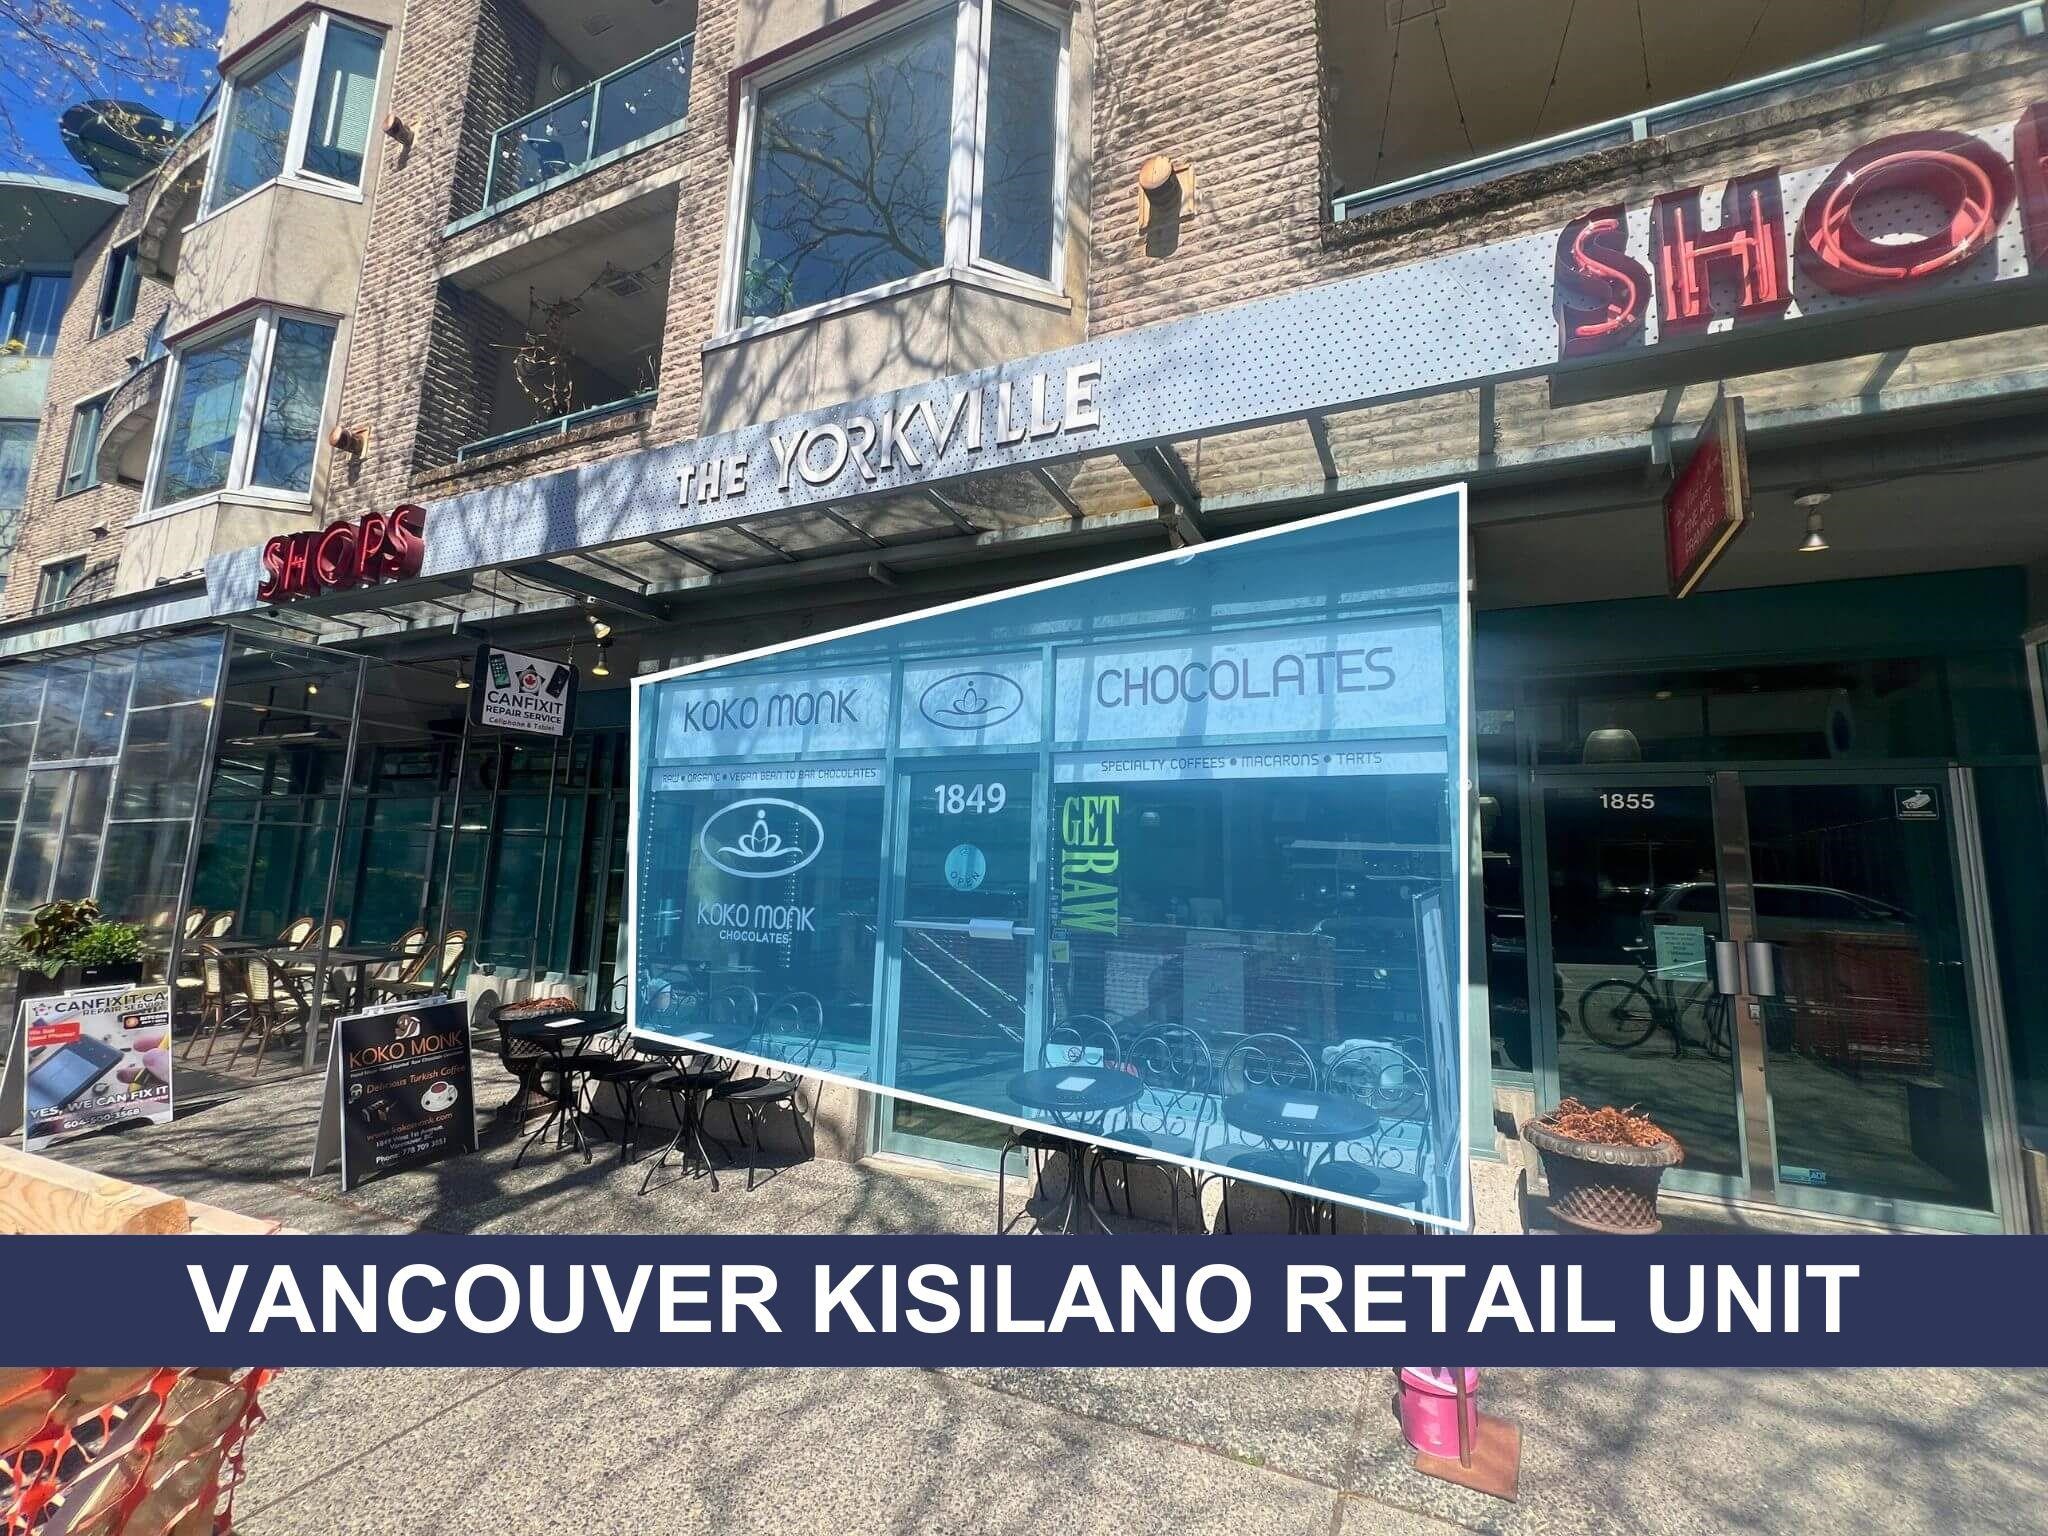 Kitsilano Land Commercial for sale:    (Listed 6800-05-03)